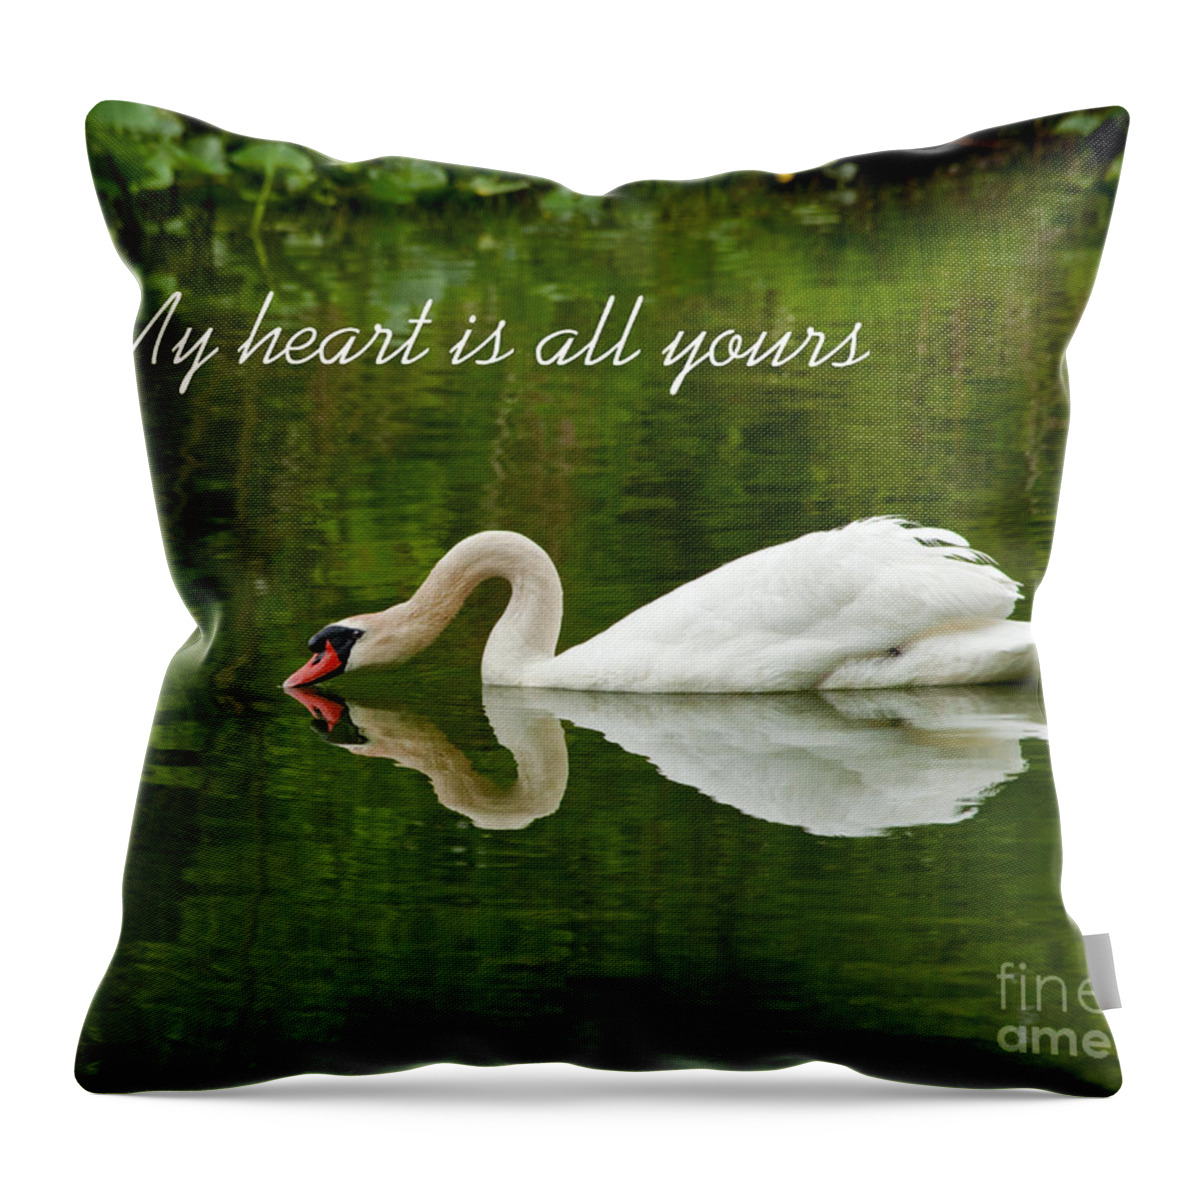 Swan Lake Photographs Throw Pillow featuring the photograph Valentines Swan Heart Original Fine Art Photograph Print And Greeting Card by Jerry Cowart